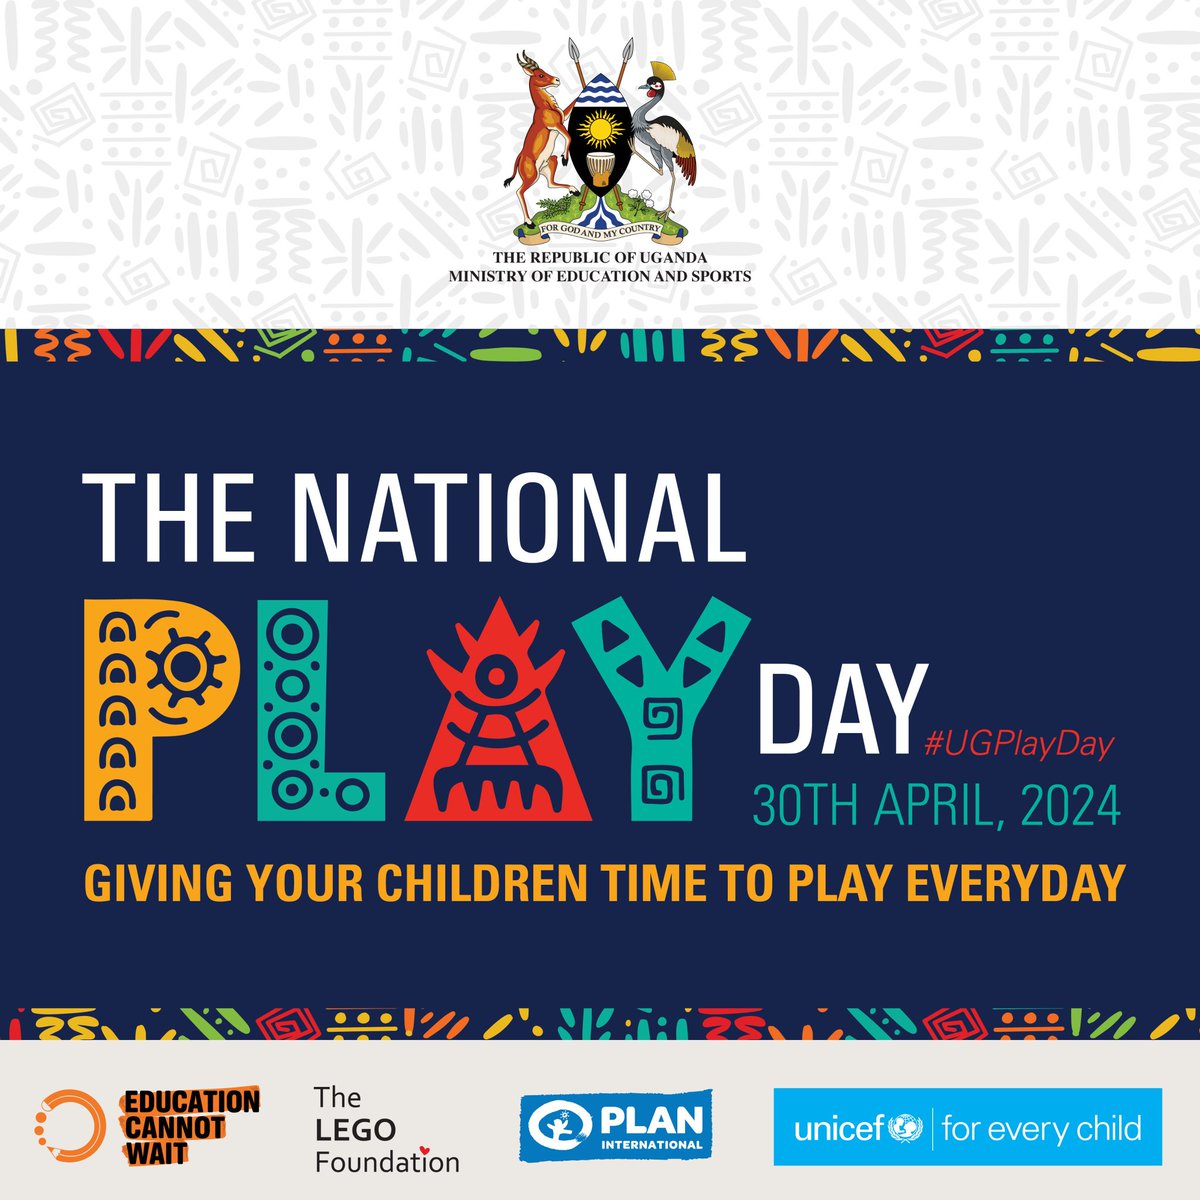 Today is #UgPlayDay🇺🇬! This #UgPlayDay & every day we should collectively commit to the adoption of play-based teaching and learning for better efficiency, equity and quality in education and call for inclusive, affordable & safe #ECD & education centers + schools!